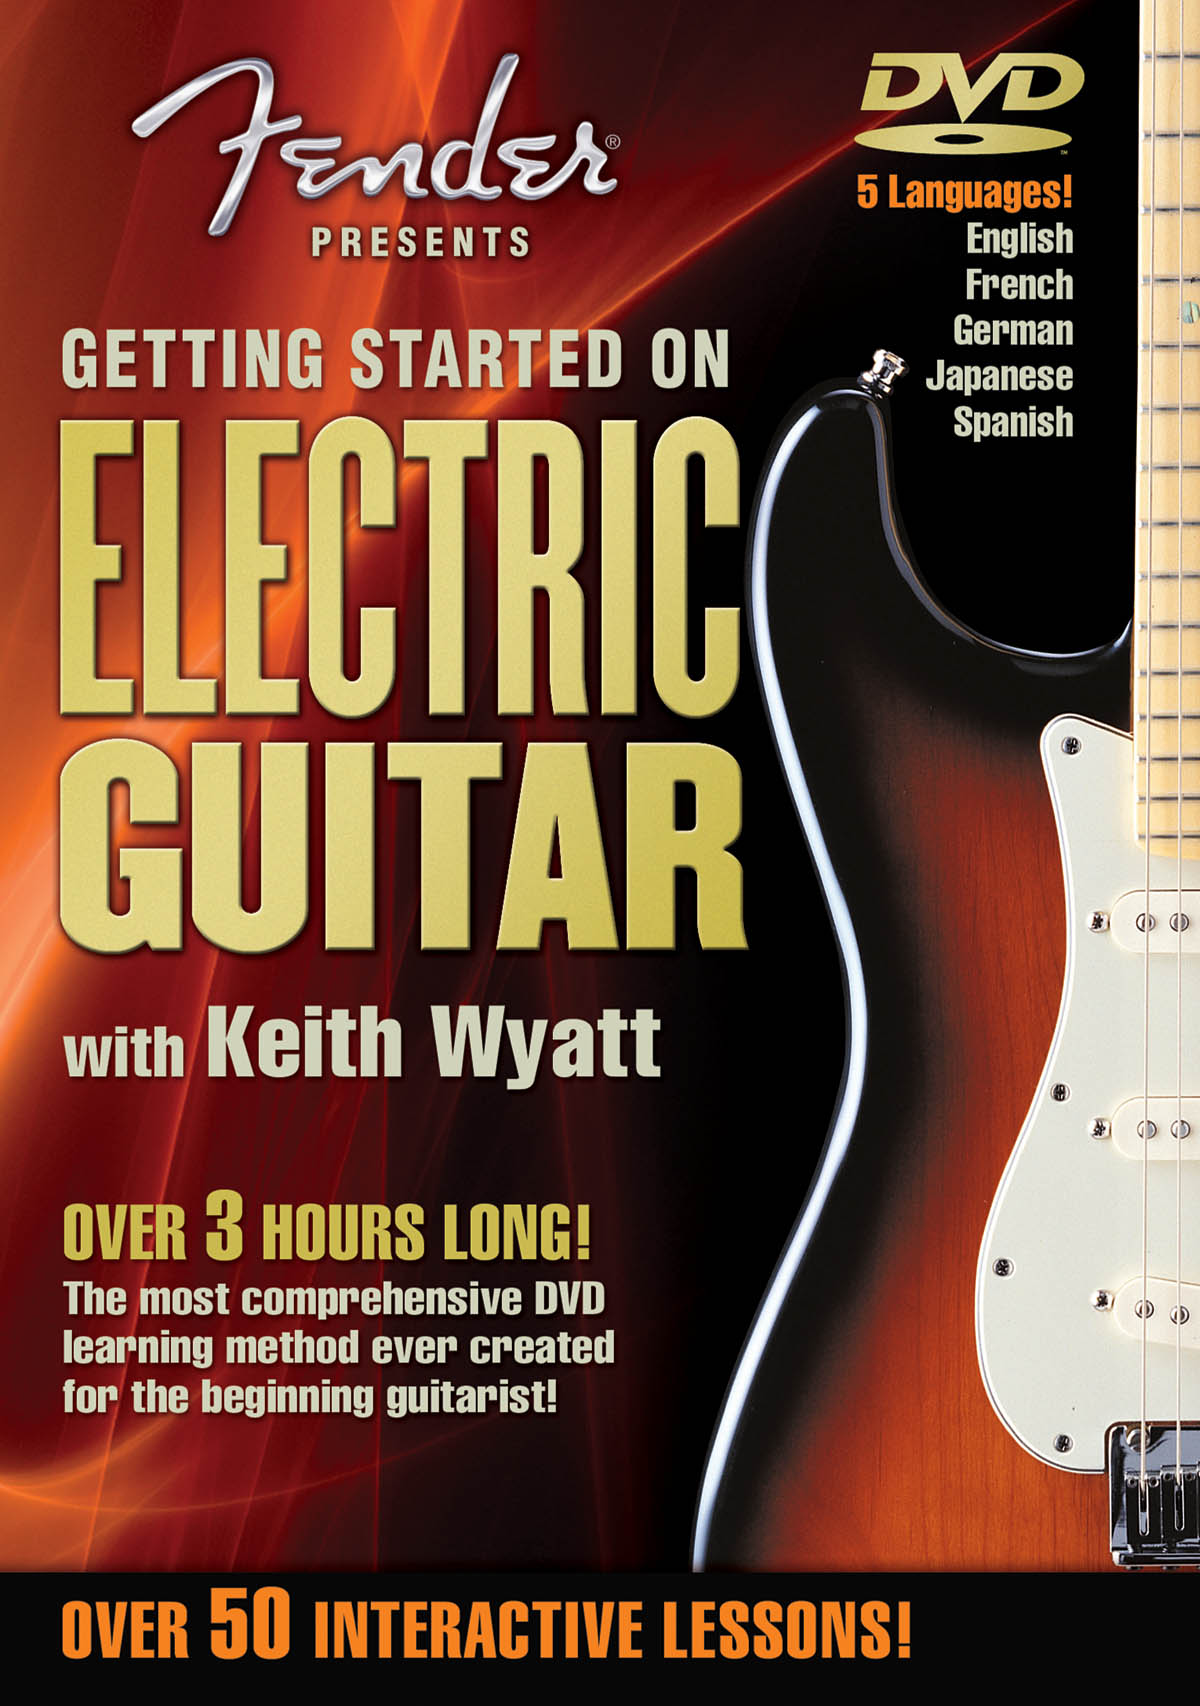 Keith Wyatt: Fender Presents Getting Started on Electric Guitar: Guitar Solo: